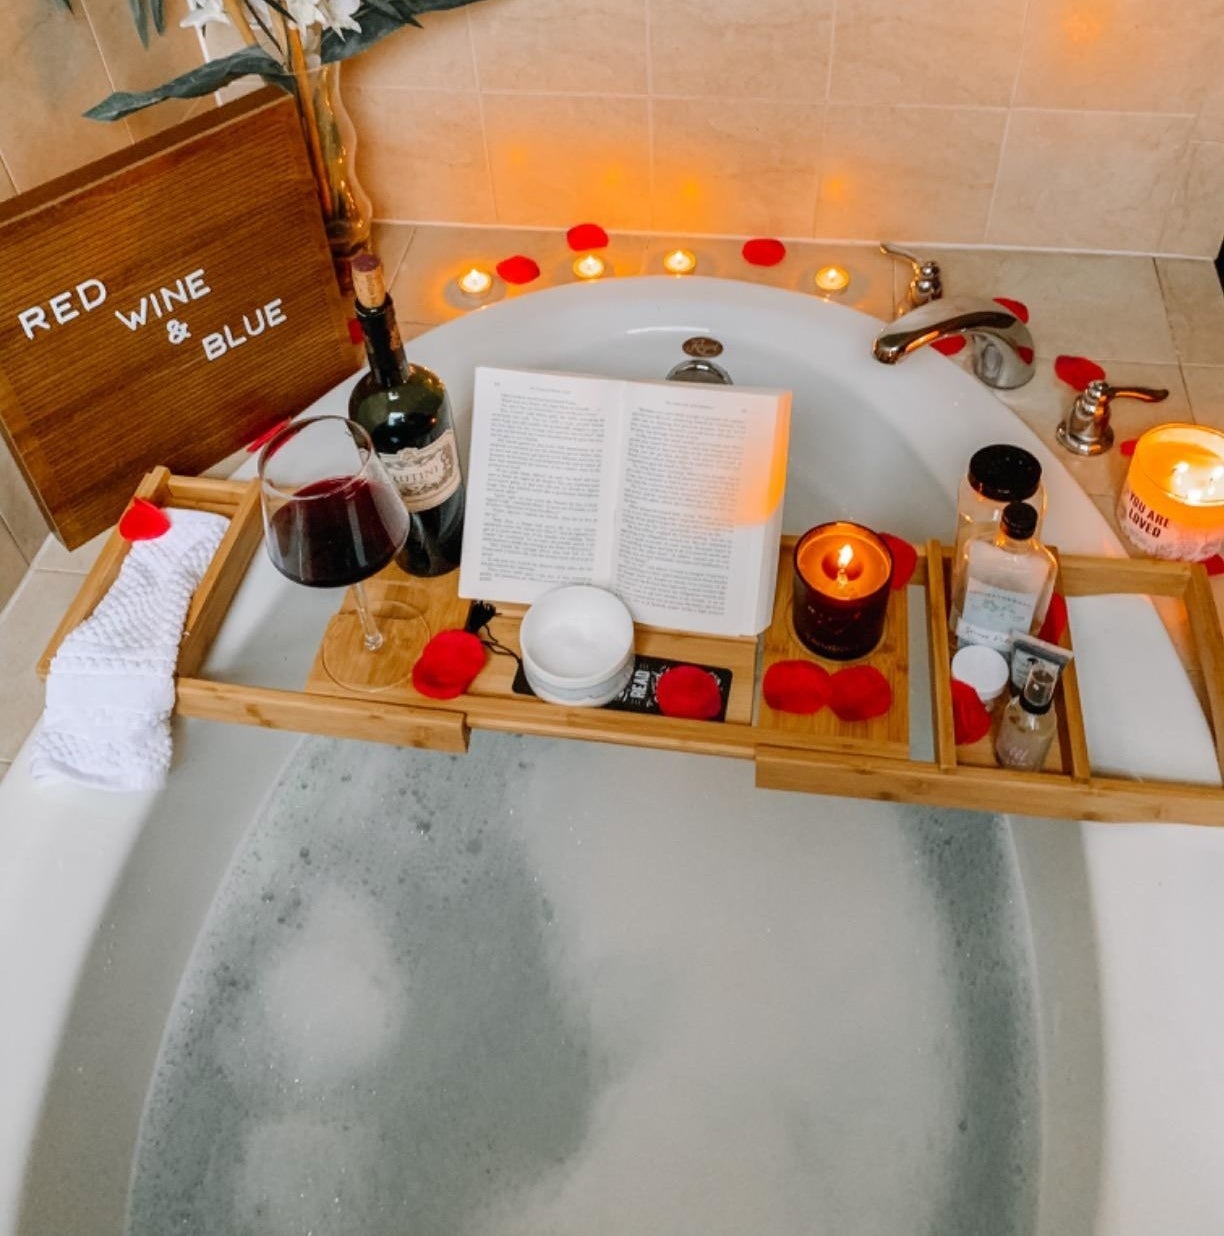 Reviewer image of a wooden bath caddy holding an book, wine glass, wine bottle, candle, and more accessories